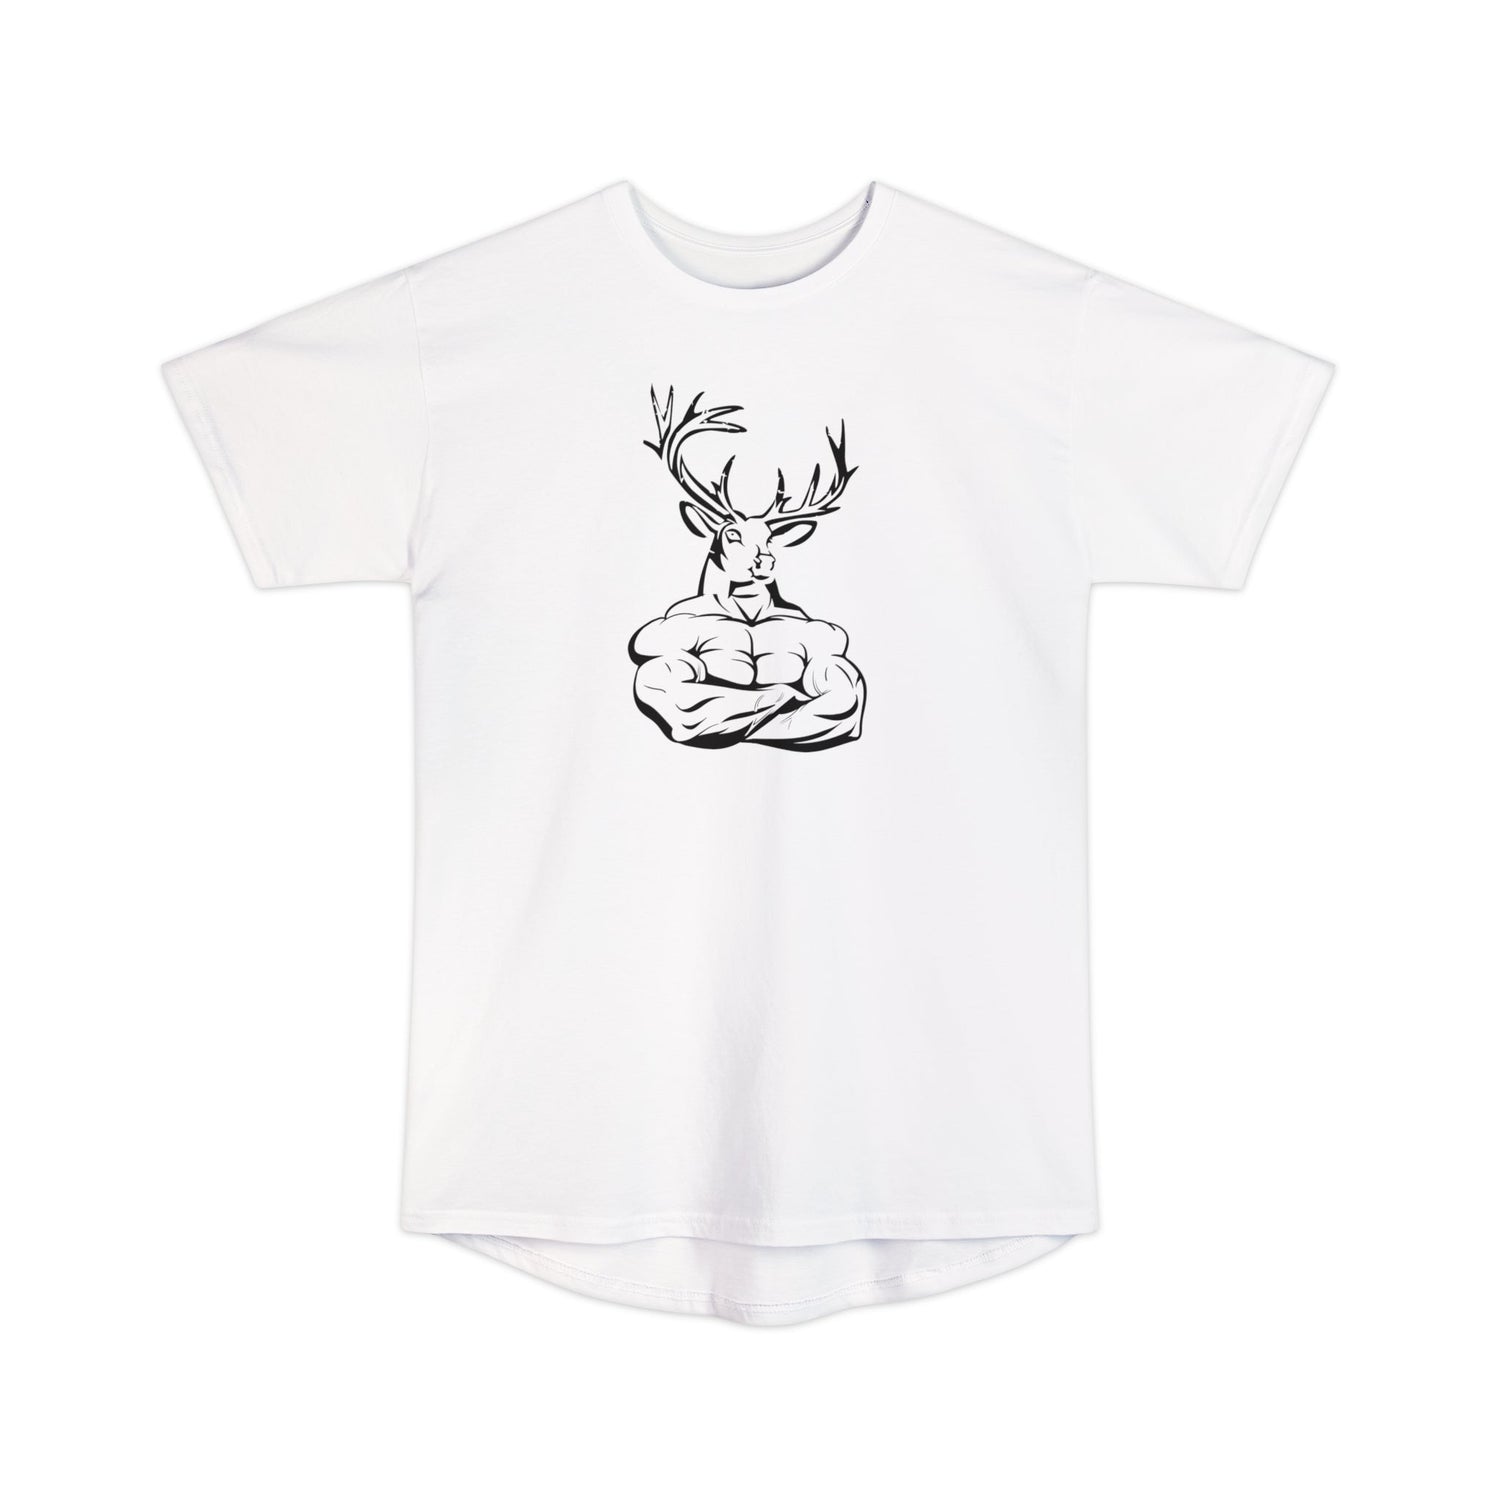 Athletic tall deer hunting t-shirt, color white, front design placement